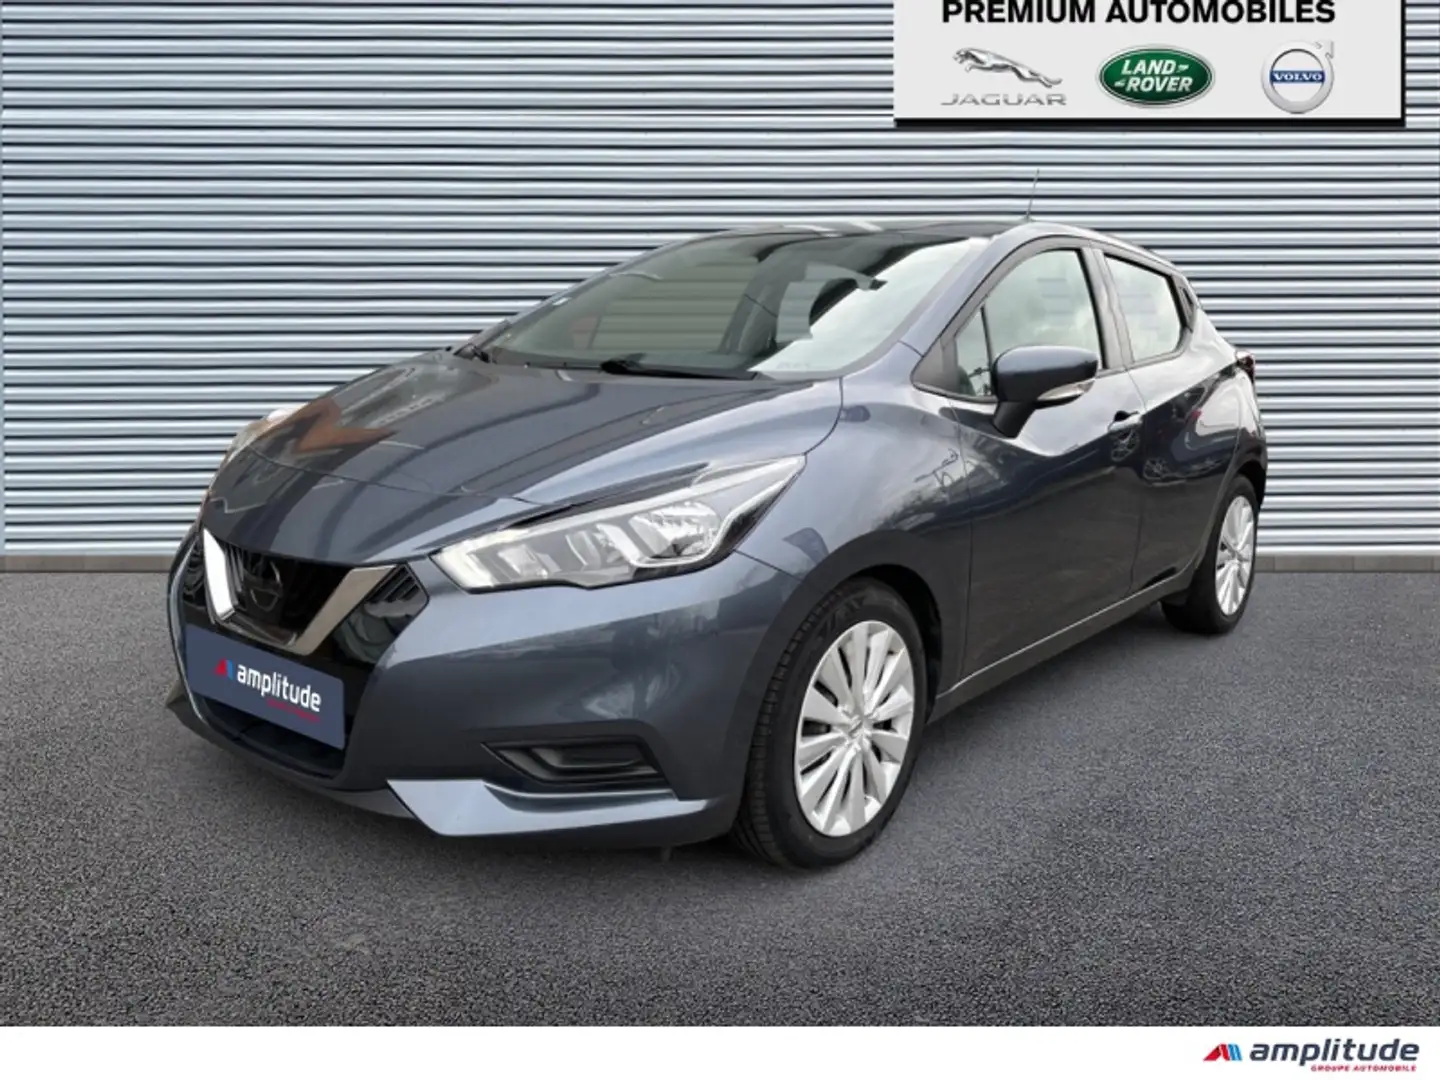 Nissan Micra 1.0 IG-T 100ch Business Edition 2019 - 1